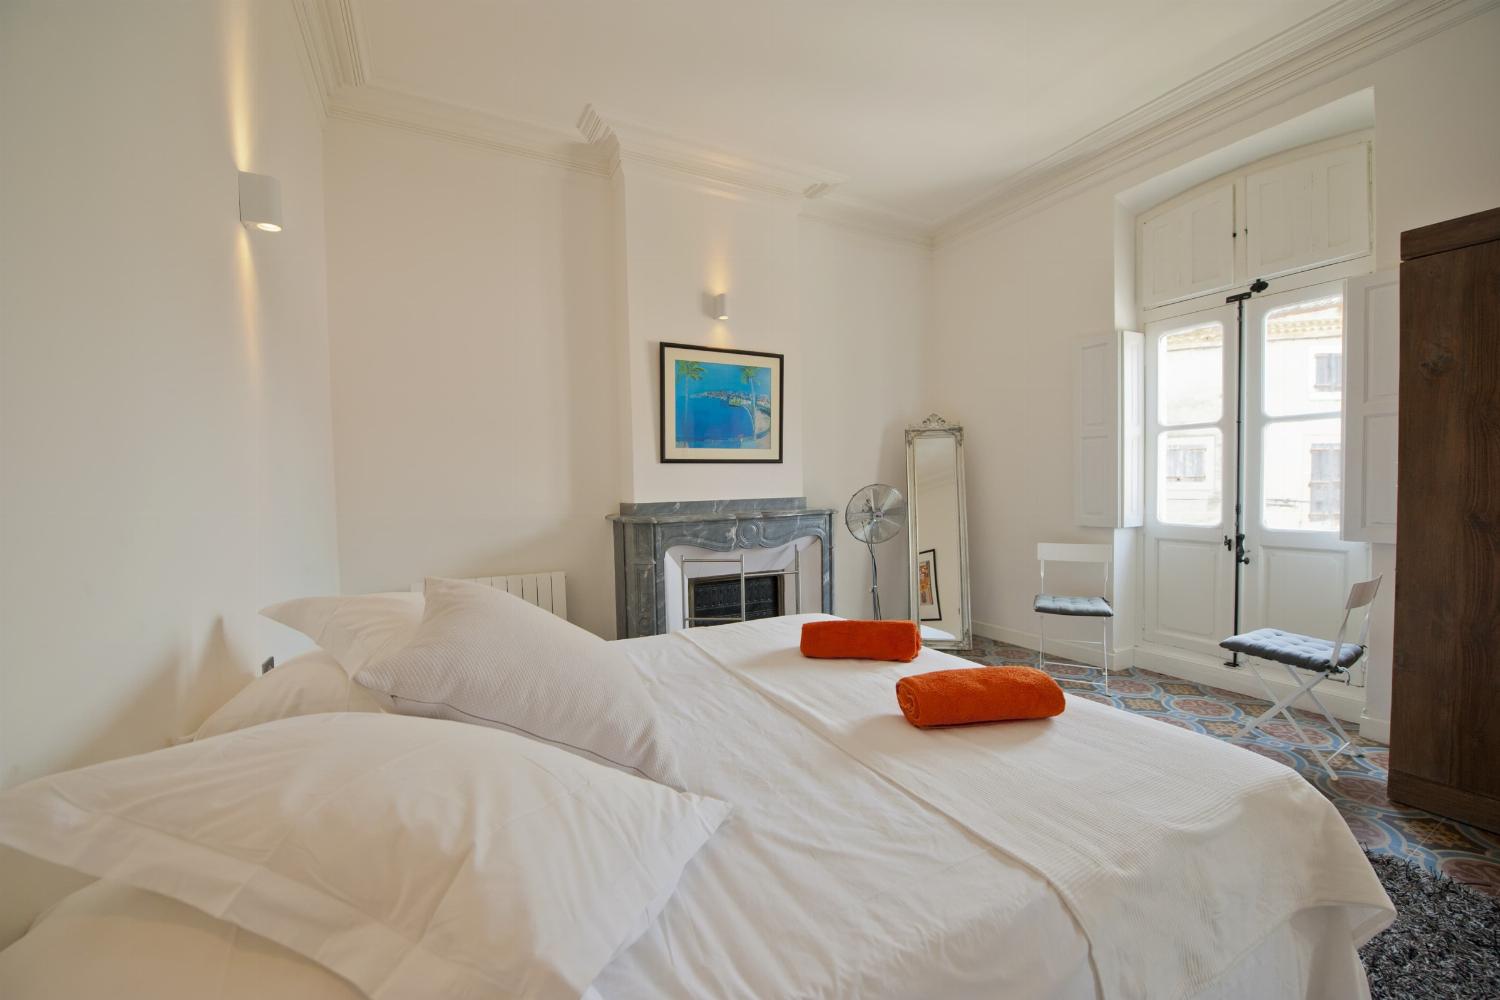 Bedroom | Rental home in South of France